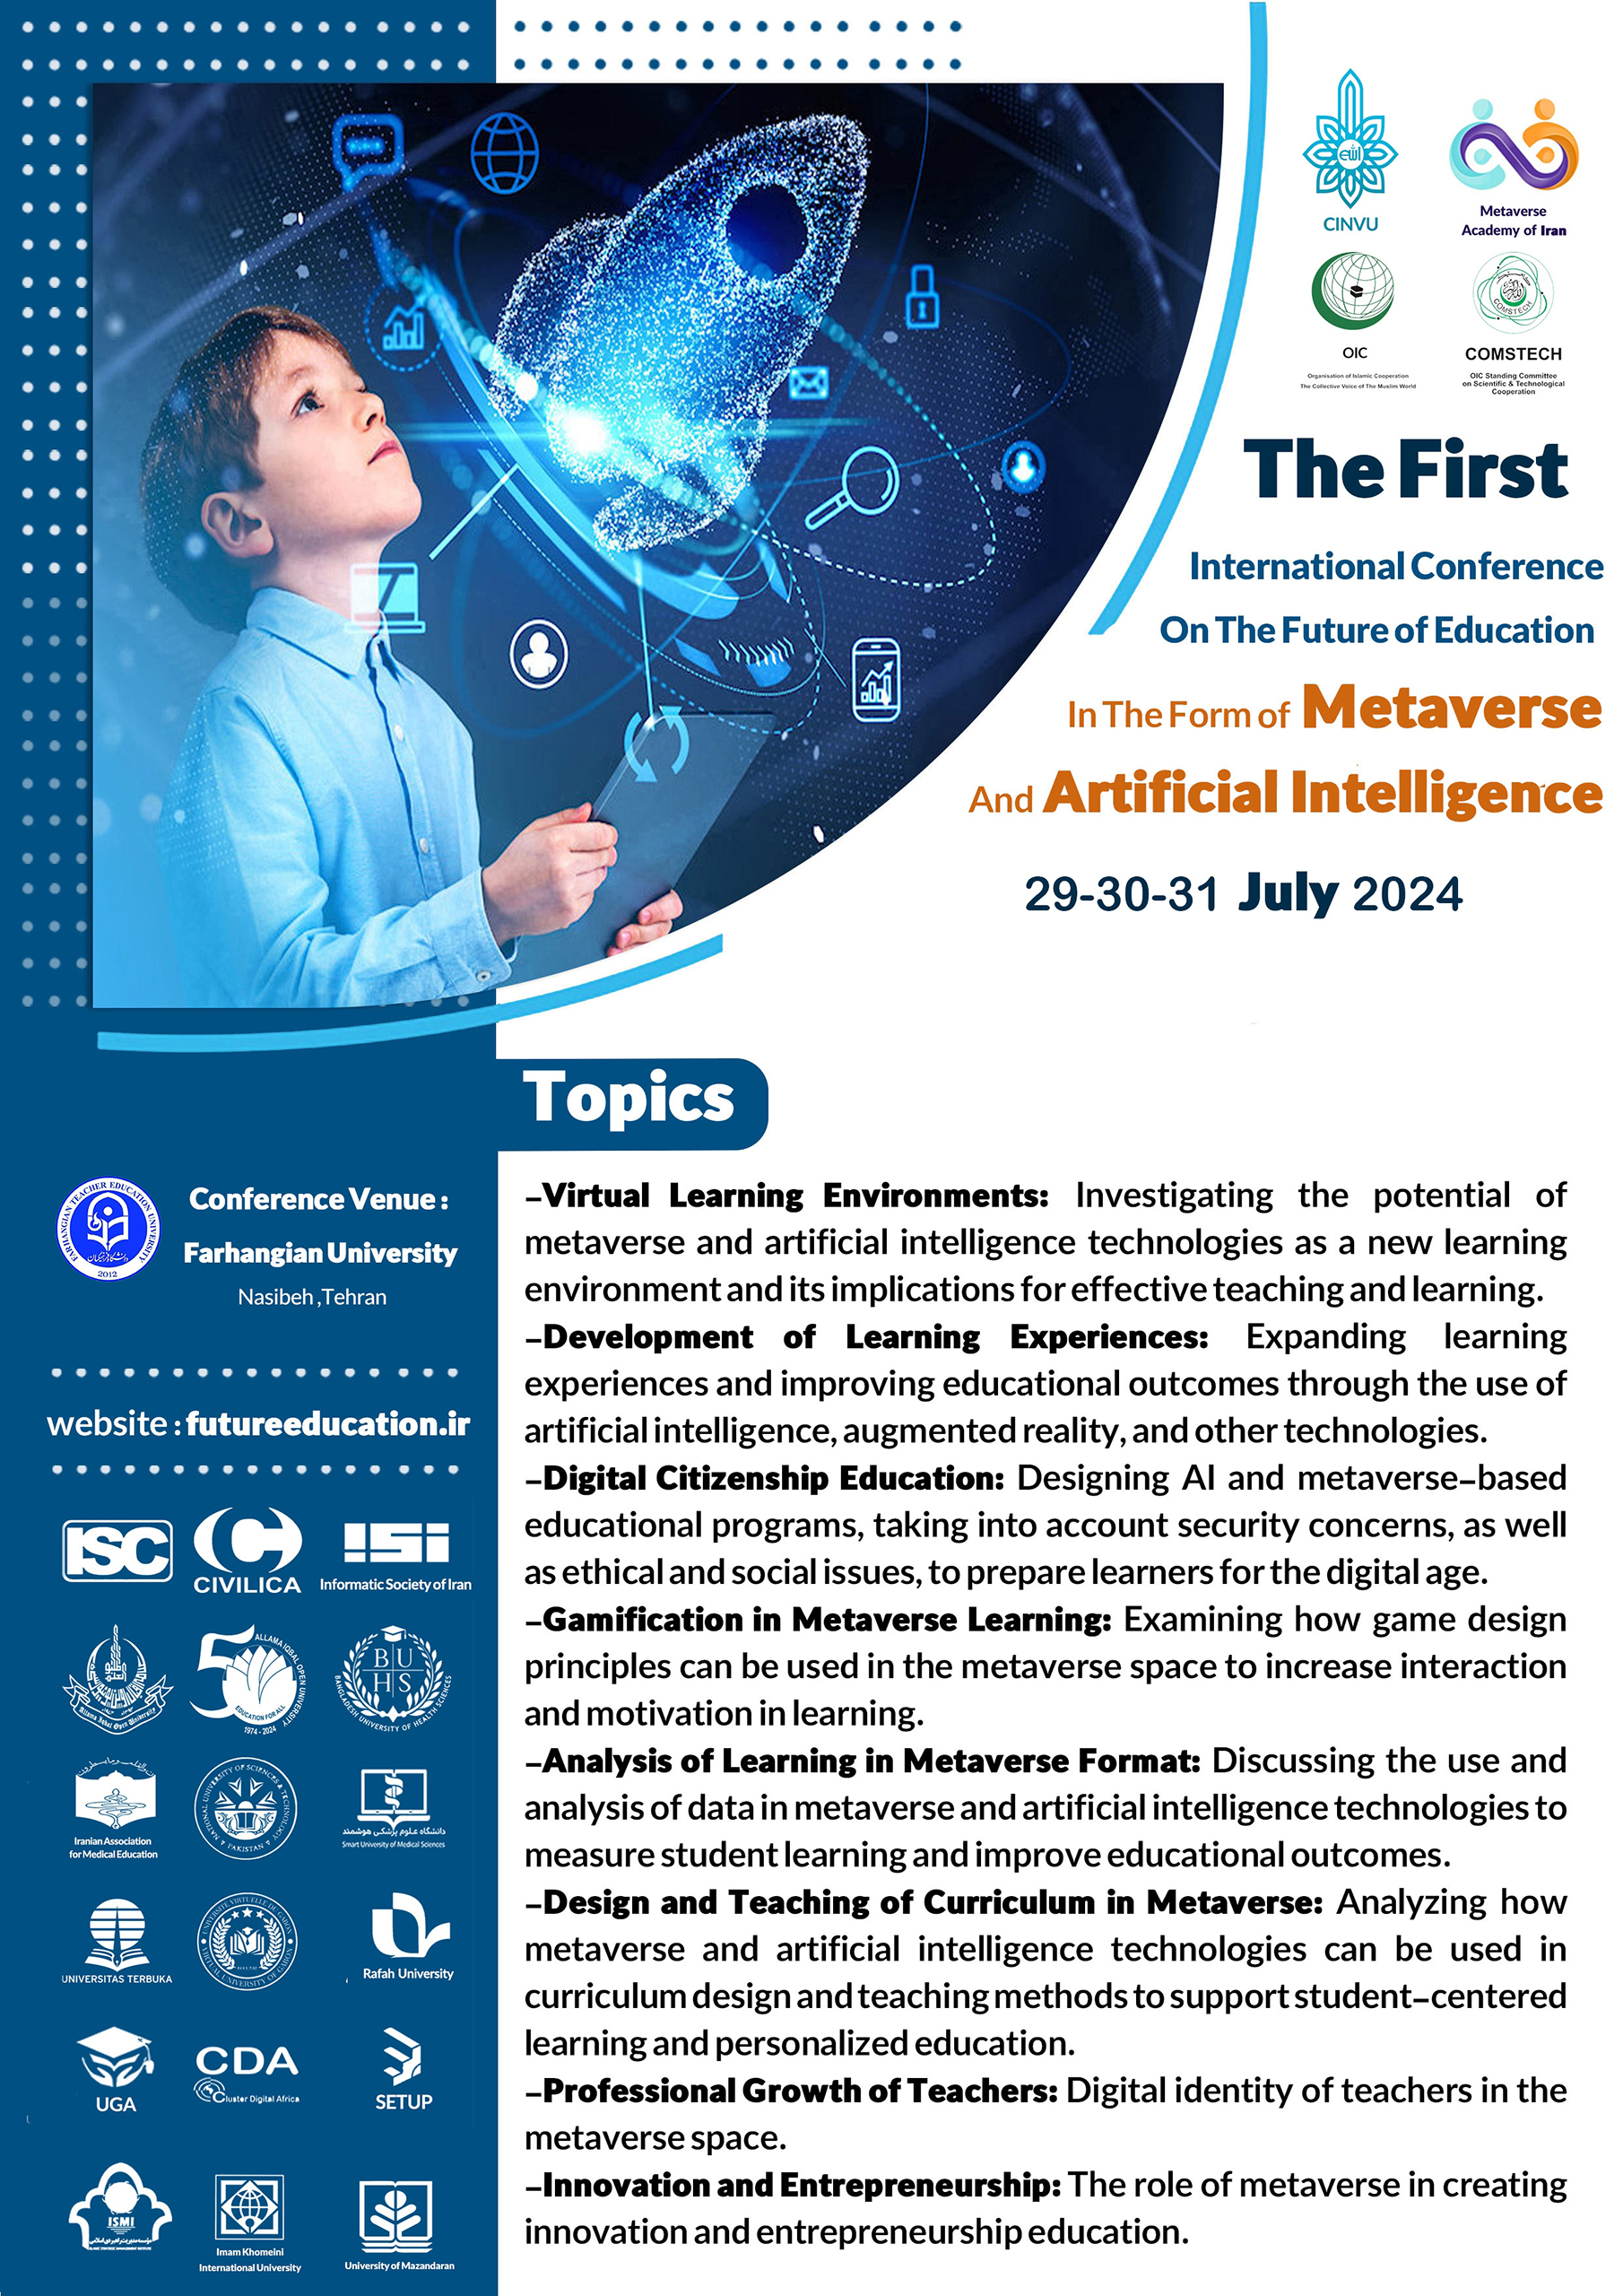 The First International Conference on the Future of Education in the Form of Metaverse and Artificial Intelligence